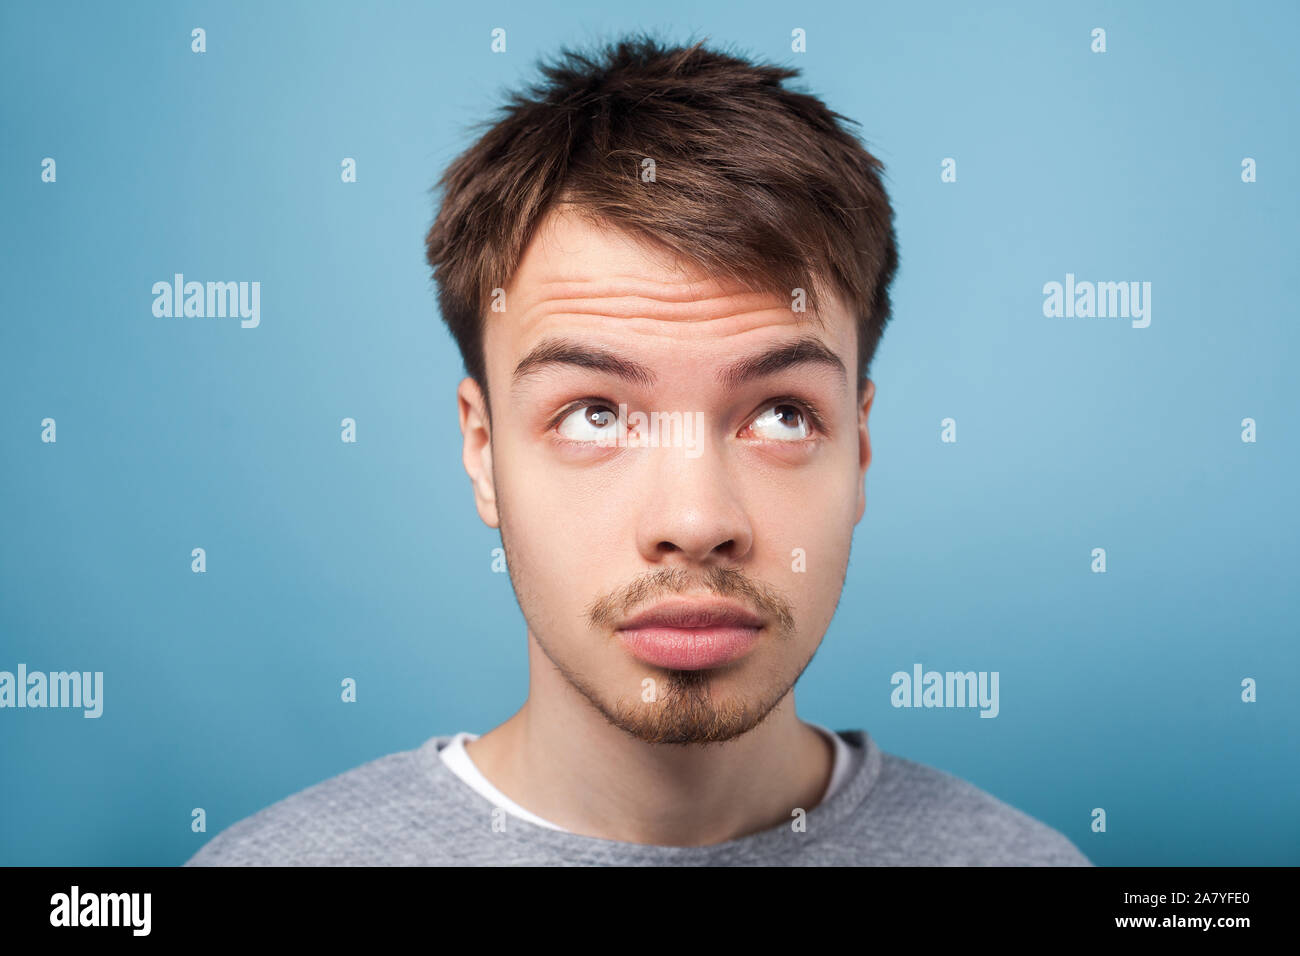 What's with my hair. Closeup portrait of young brunette man with small beard and mustache in casual sweater looking up with inquiring gaze, dissatisfi Stock Photo